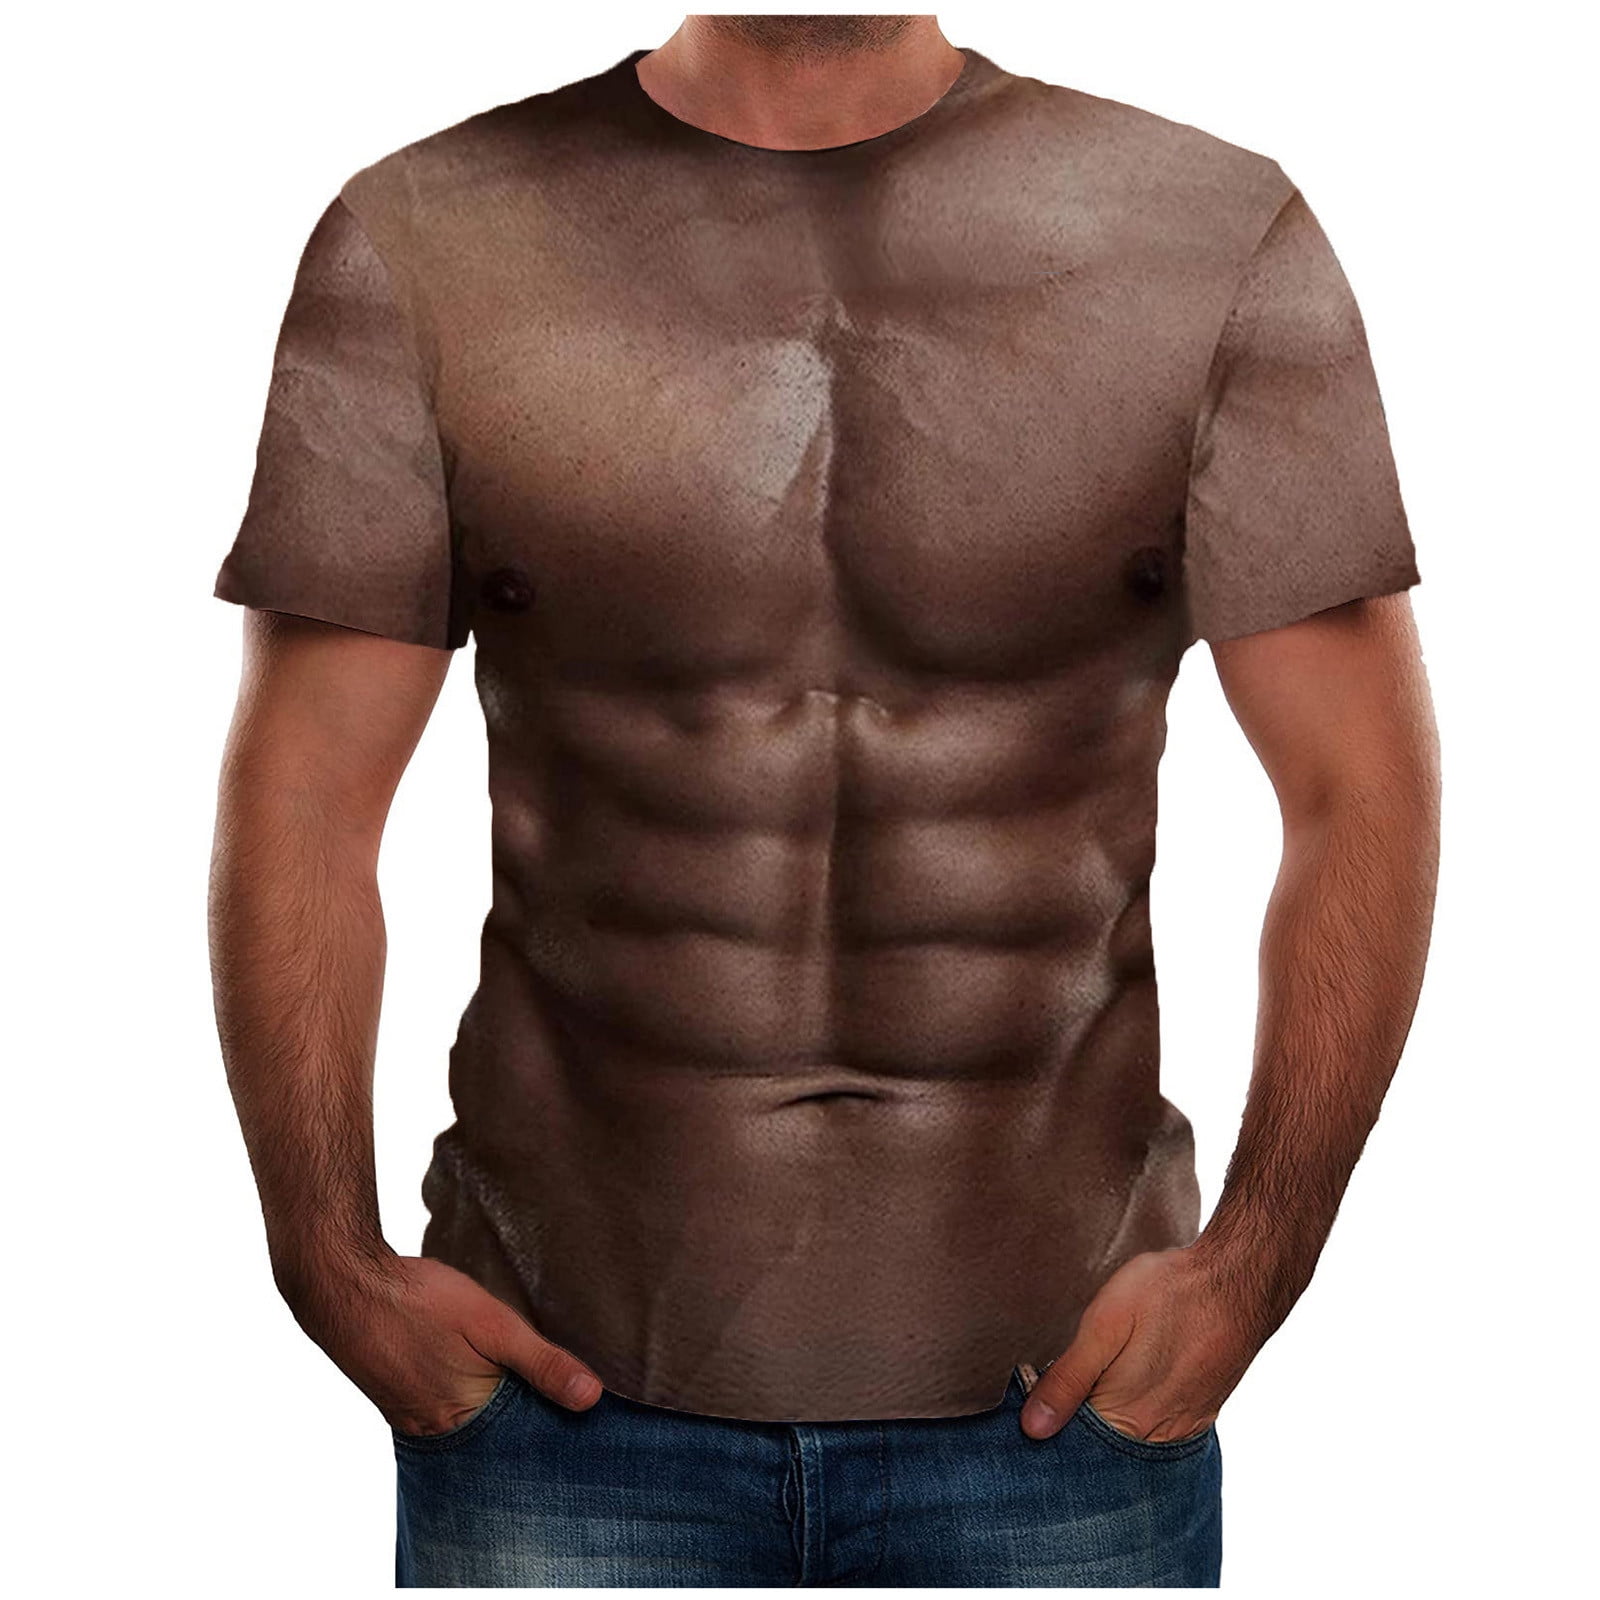 YUNAFFT Muscle Shirts for Men Fashion Men's Fashion Muscular Man Print  Fashion Fitness Round Neck Short Sleeve T-Shirt Clearance